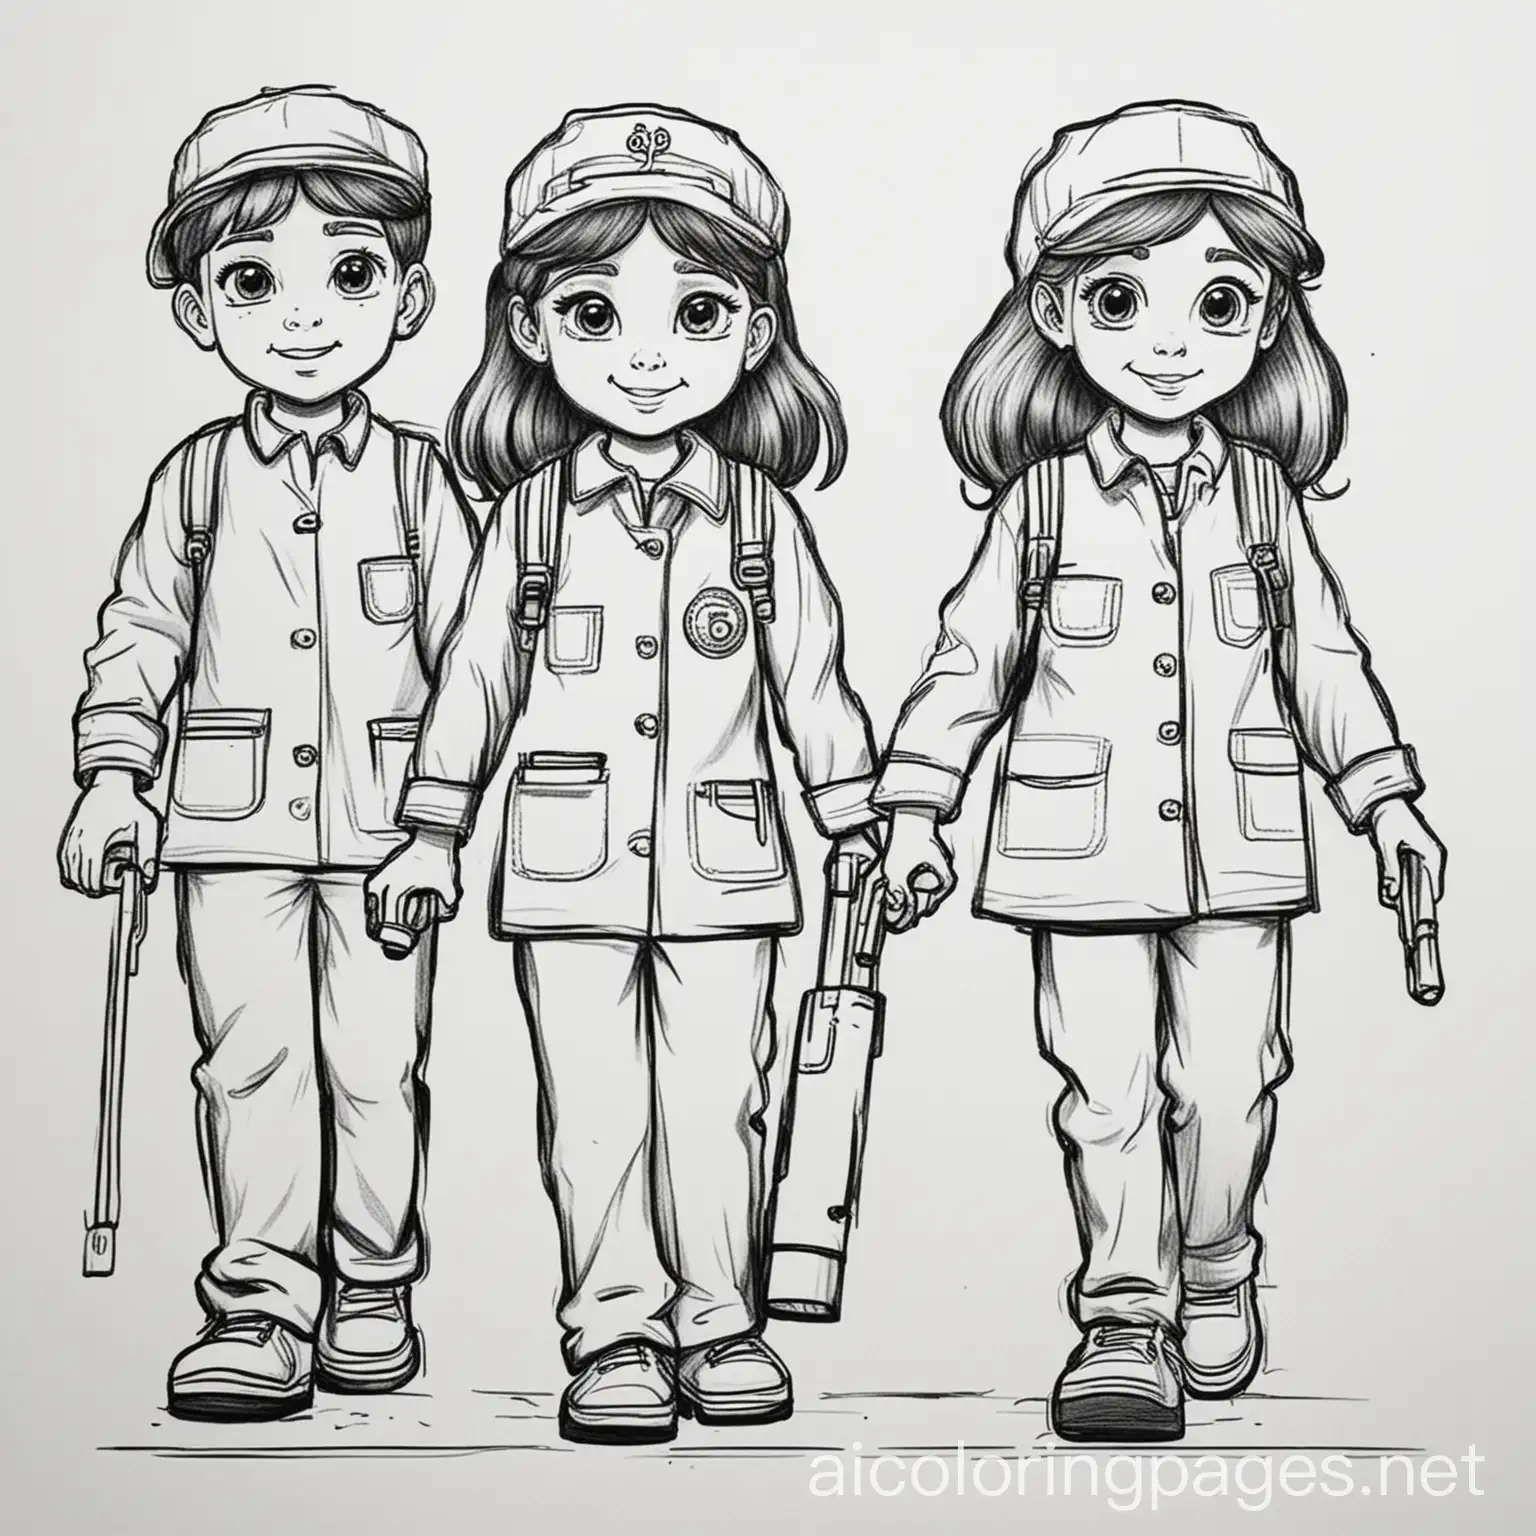 boys and girls walking in their profession , Coloring Page, black and white, line art, white background, Simplicity, Ample White Space. The background of the coloring page is plain white to make it easy for young children to color within the lines. The outlines of all the subjects are easy to distinguish, making it simple for kids to color without too much difficulty